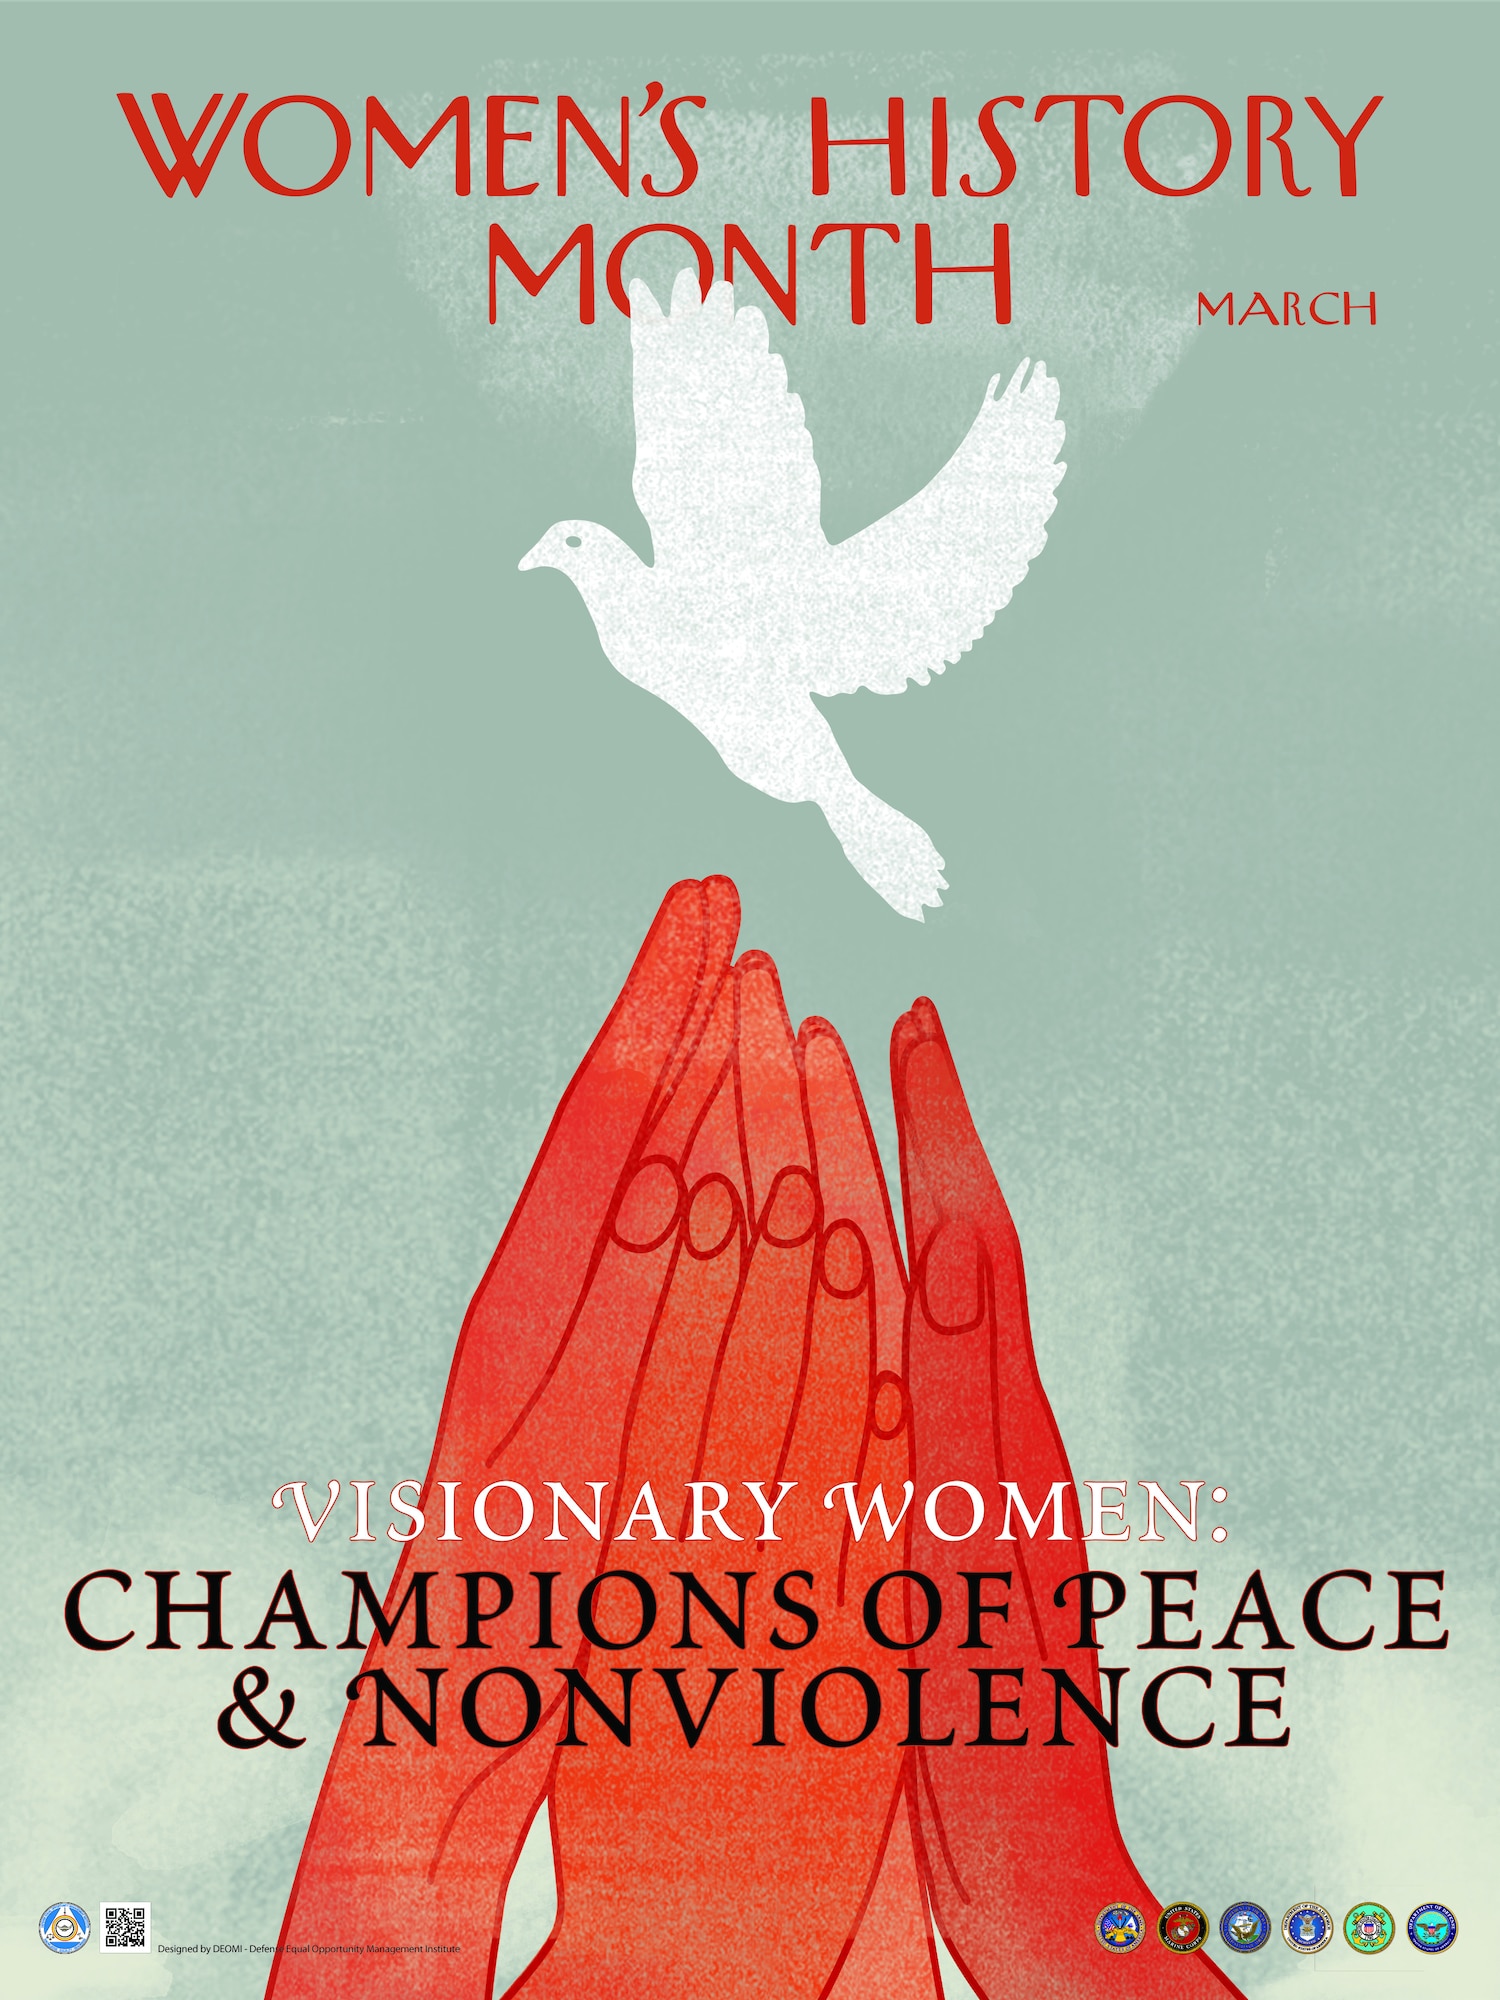 The 2019 Department of Defense theme for Women's History Month is "Visionary Women: Champions of Peace and Nonviolence.”

The theme's imagery is represented in the poster of female hands reaching for a dove, the universal symbol of peace.

Women’s History Month honors celebrates the struggles and achievements of American women throughout the United States during the month of March. 

The poster is courtesy of the Defense Equal Opportunity Management Institute.